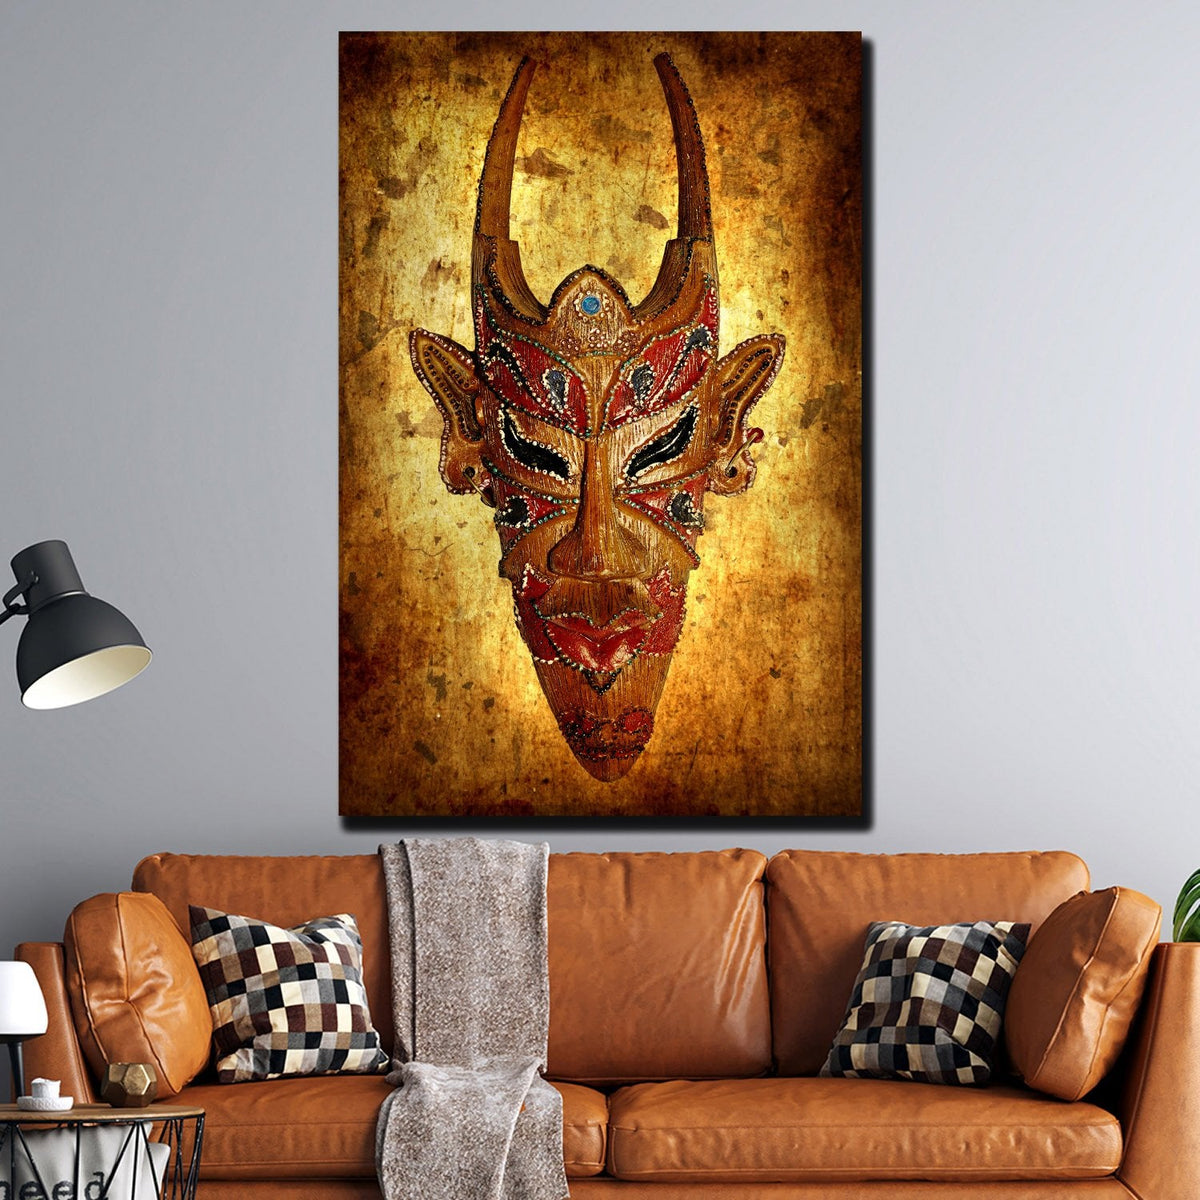 https://cdn.shopify.com/s/files/1/0387/9986/8044/products/AfricanMaskCanvasPrintStretched-1.jpg